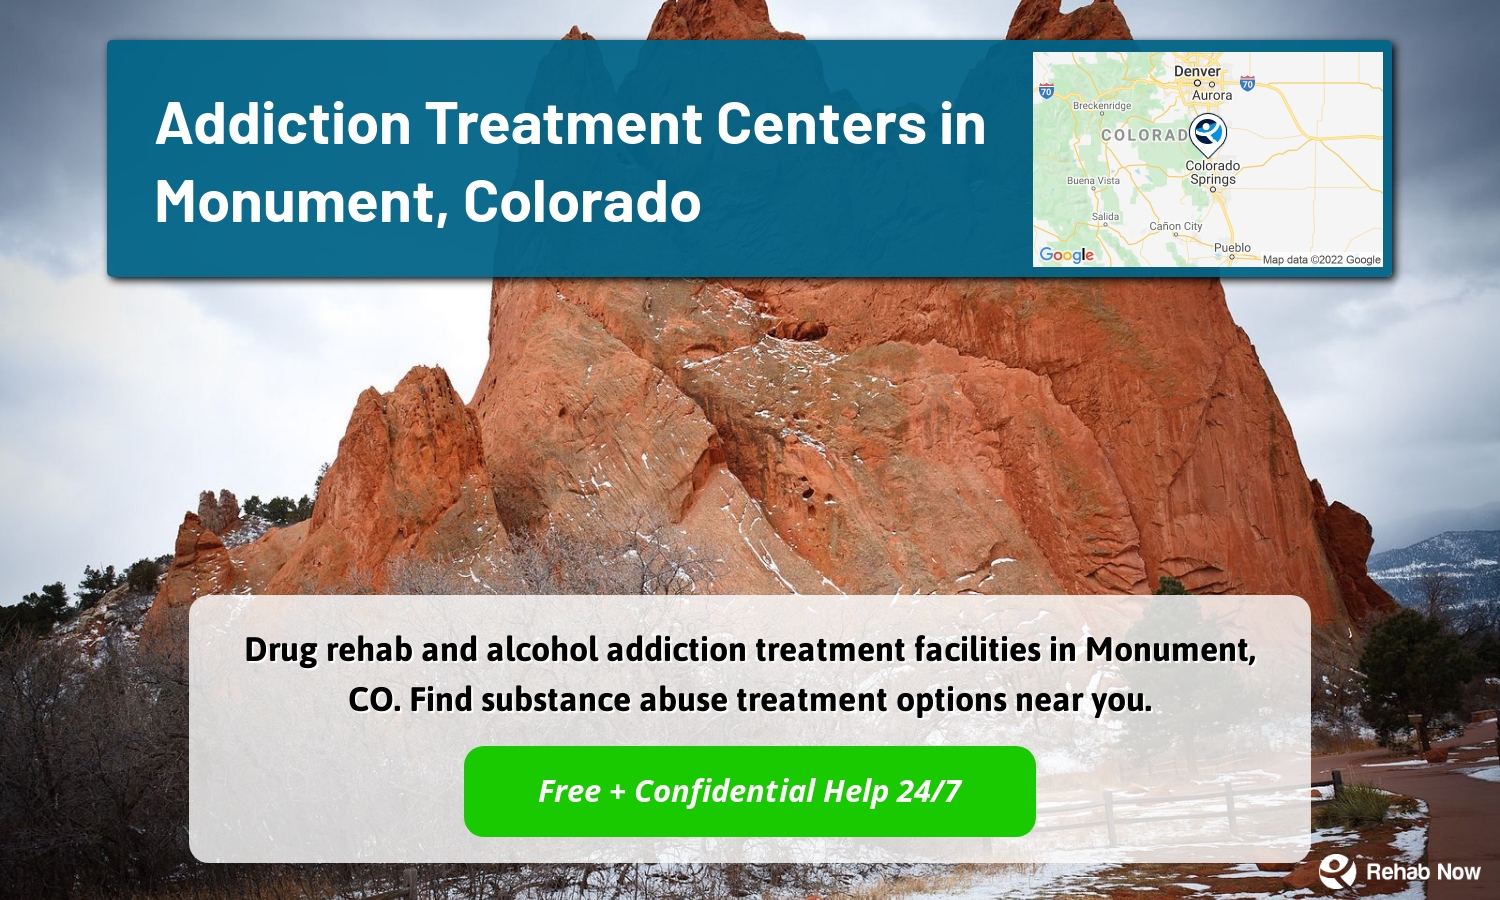 Drug rehab and alcohol addiction treatment facilities in Monument, CO. Find substance abuse treatment options near you.